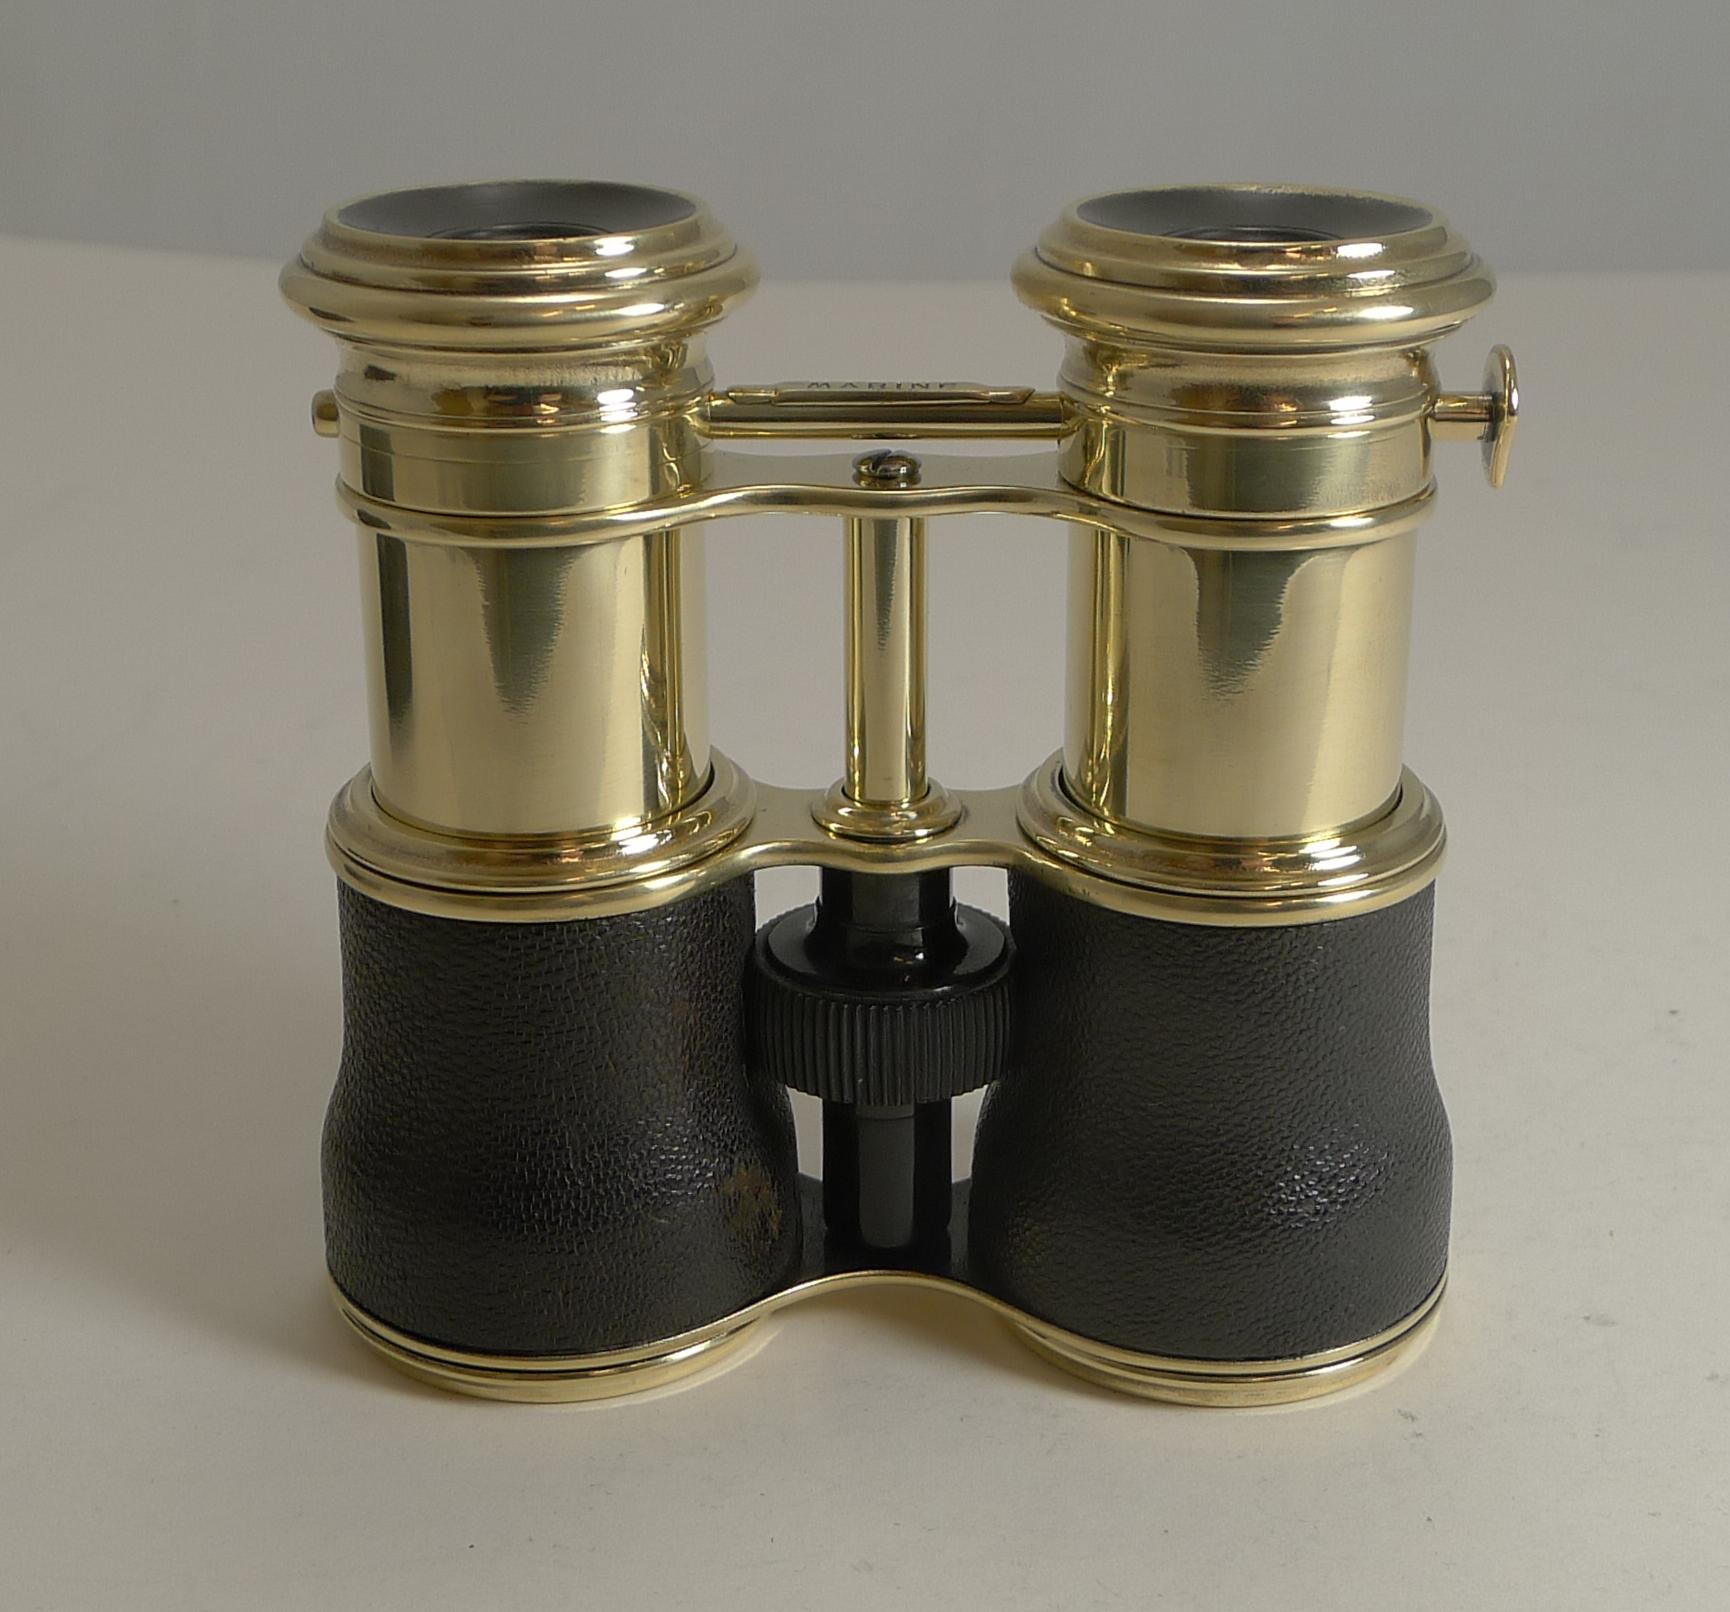 Early 20th Century Antique Triple Optic Binoculars, Marine / Theatre / Field circa 1900 by LeMaire